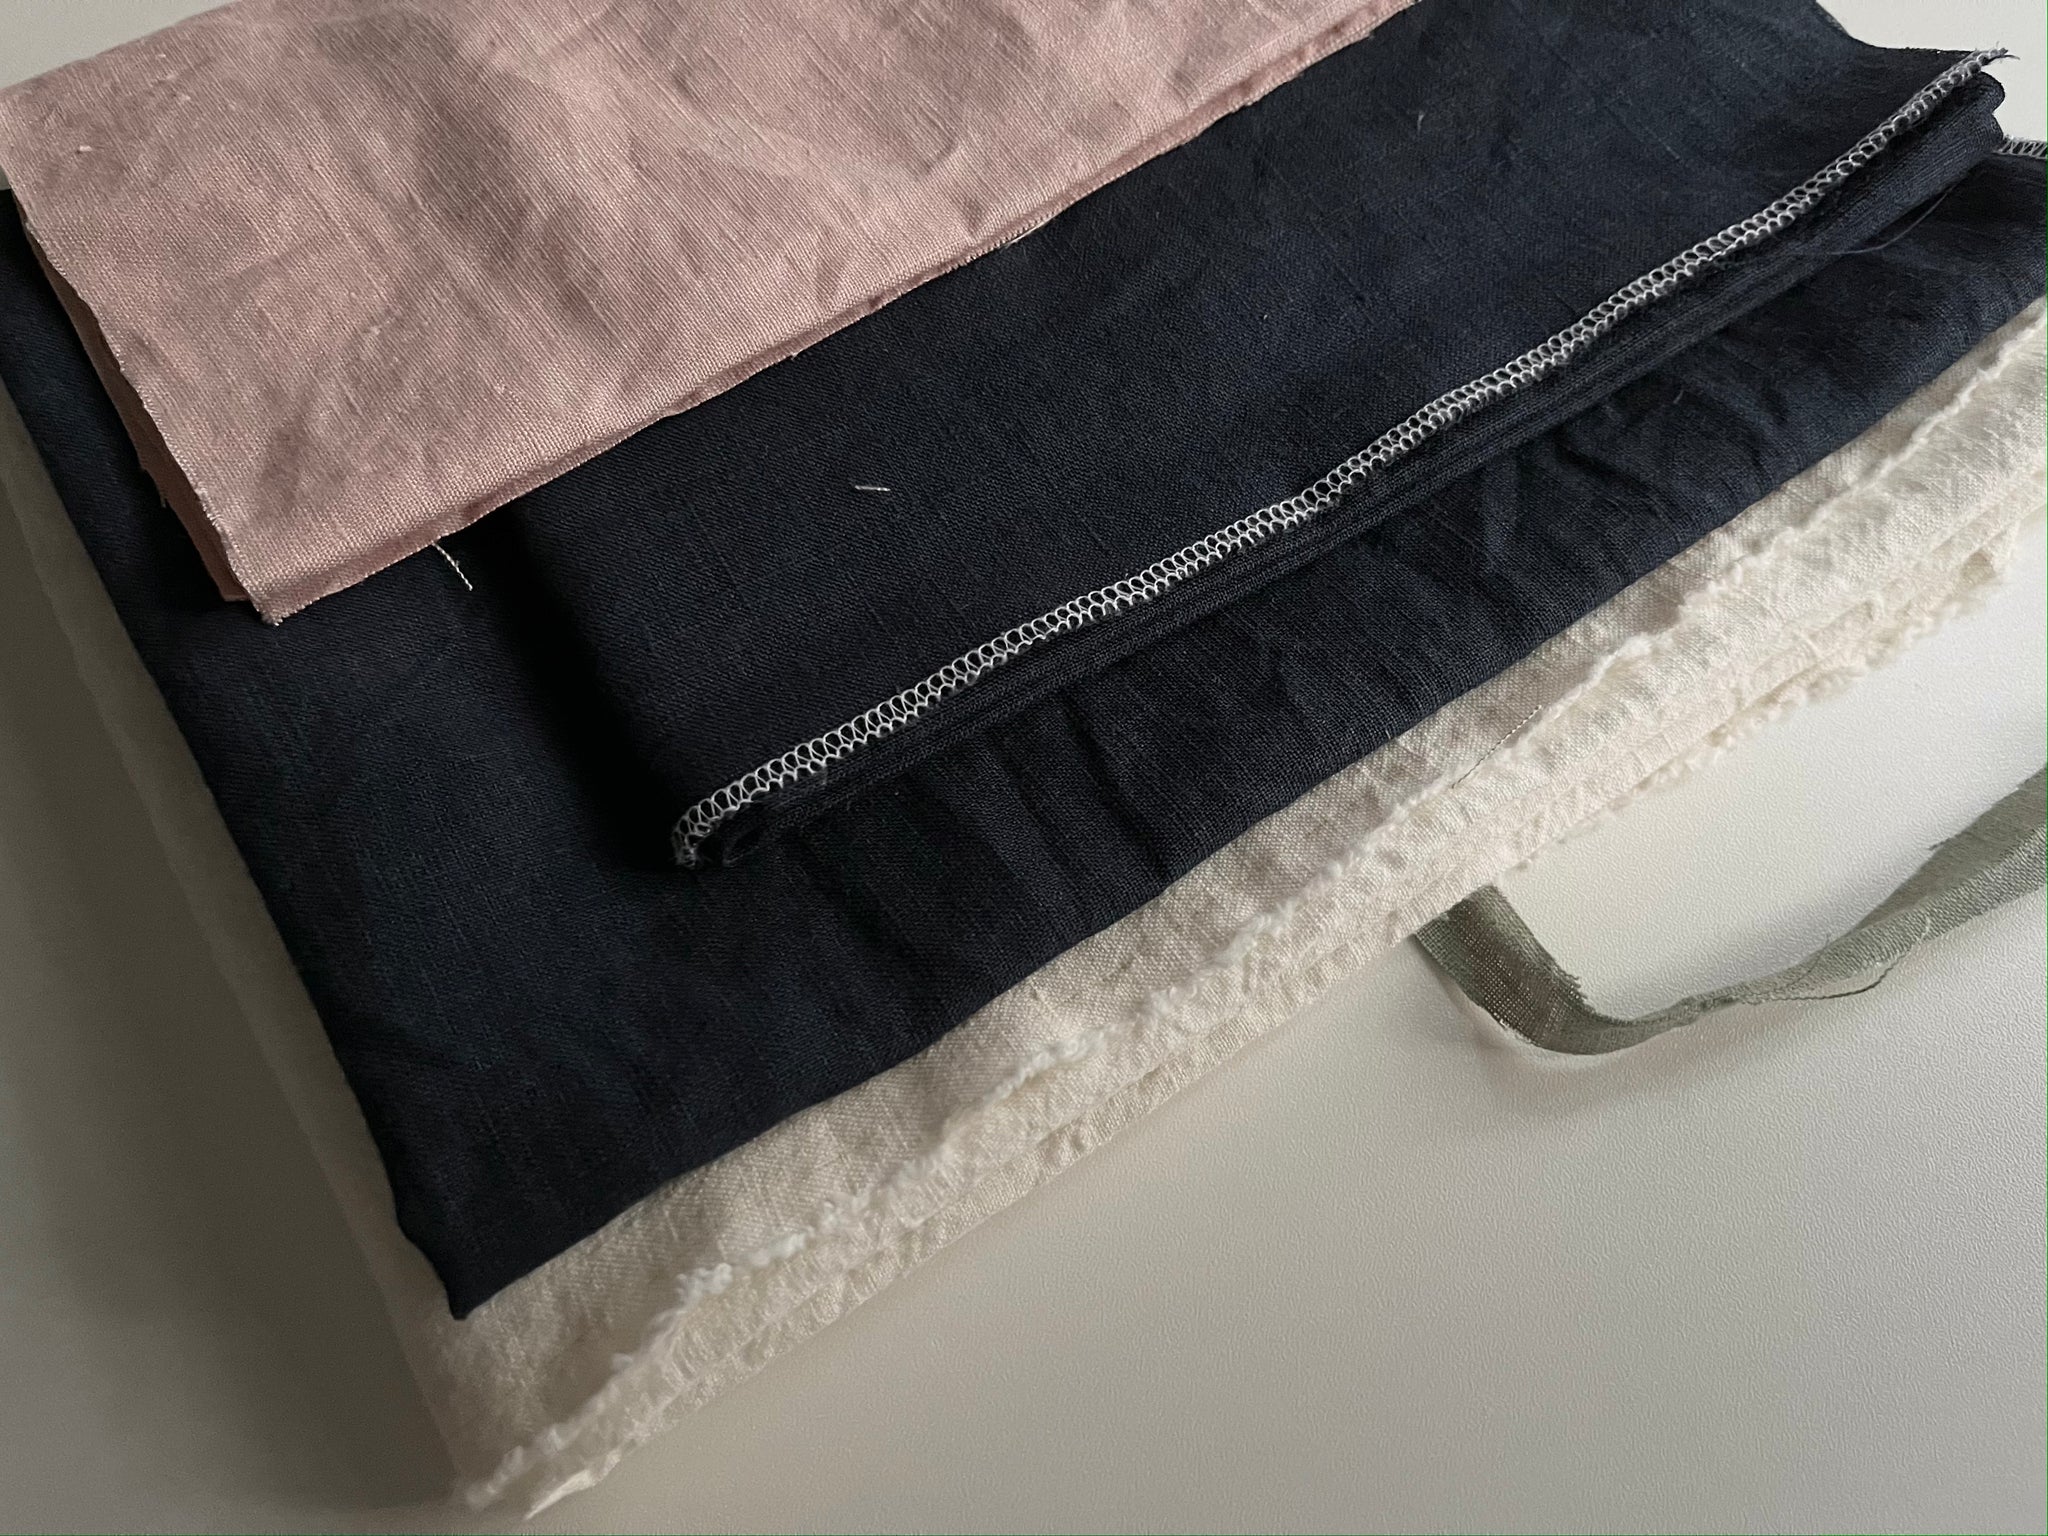 Linen Fabric Remnants - Ivory, Navy Blue, Dusty Rose